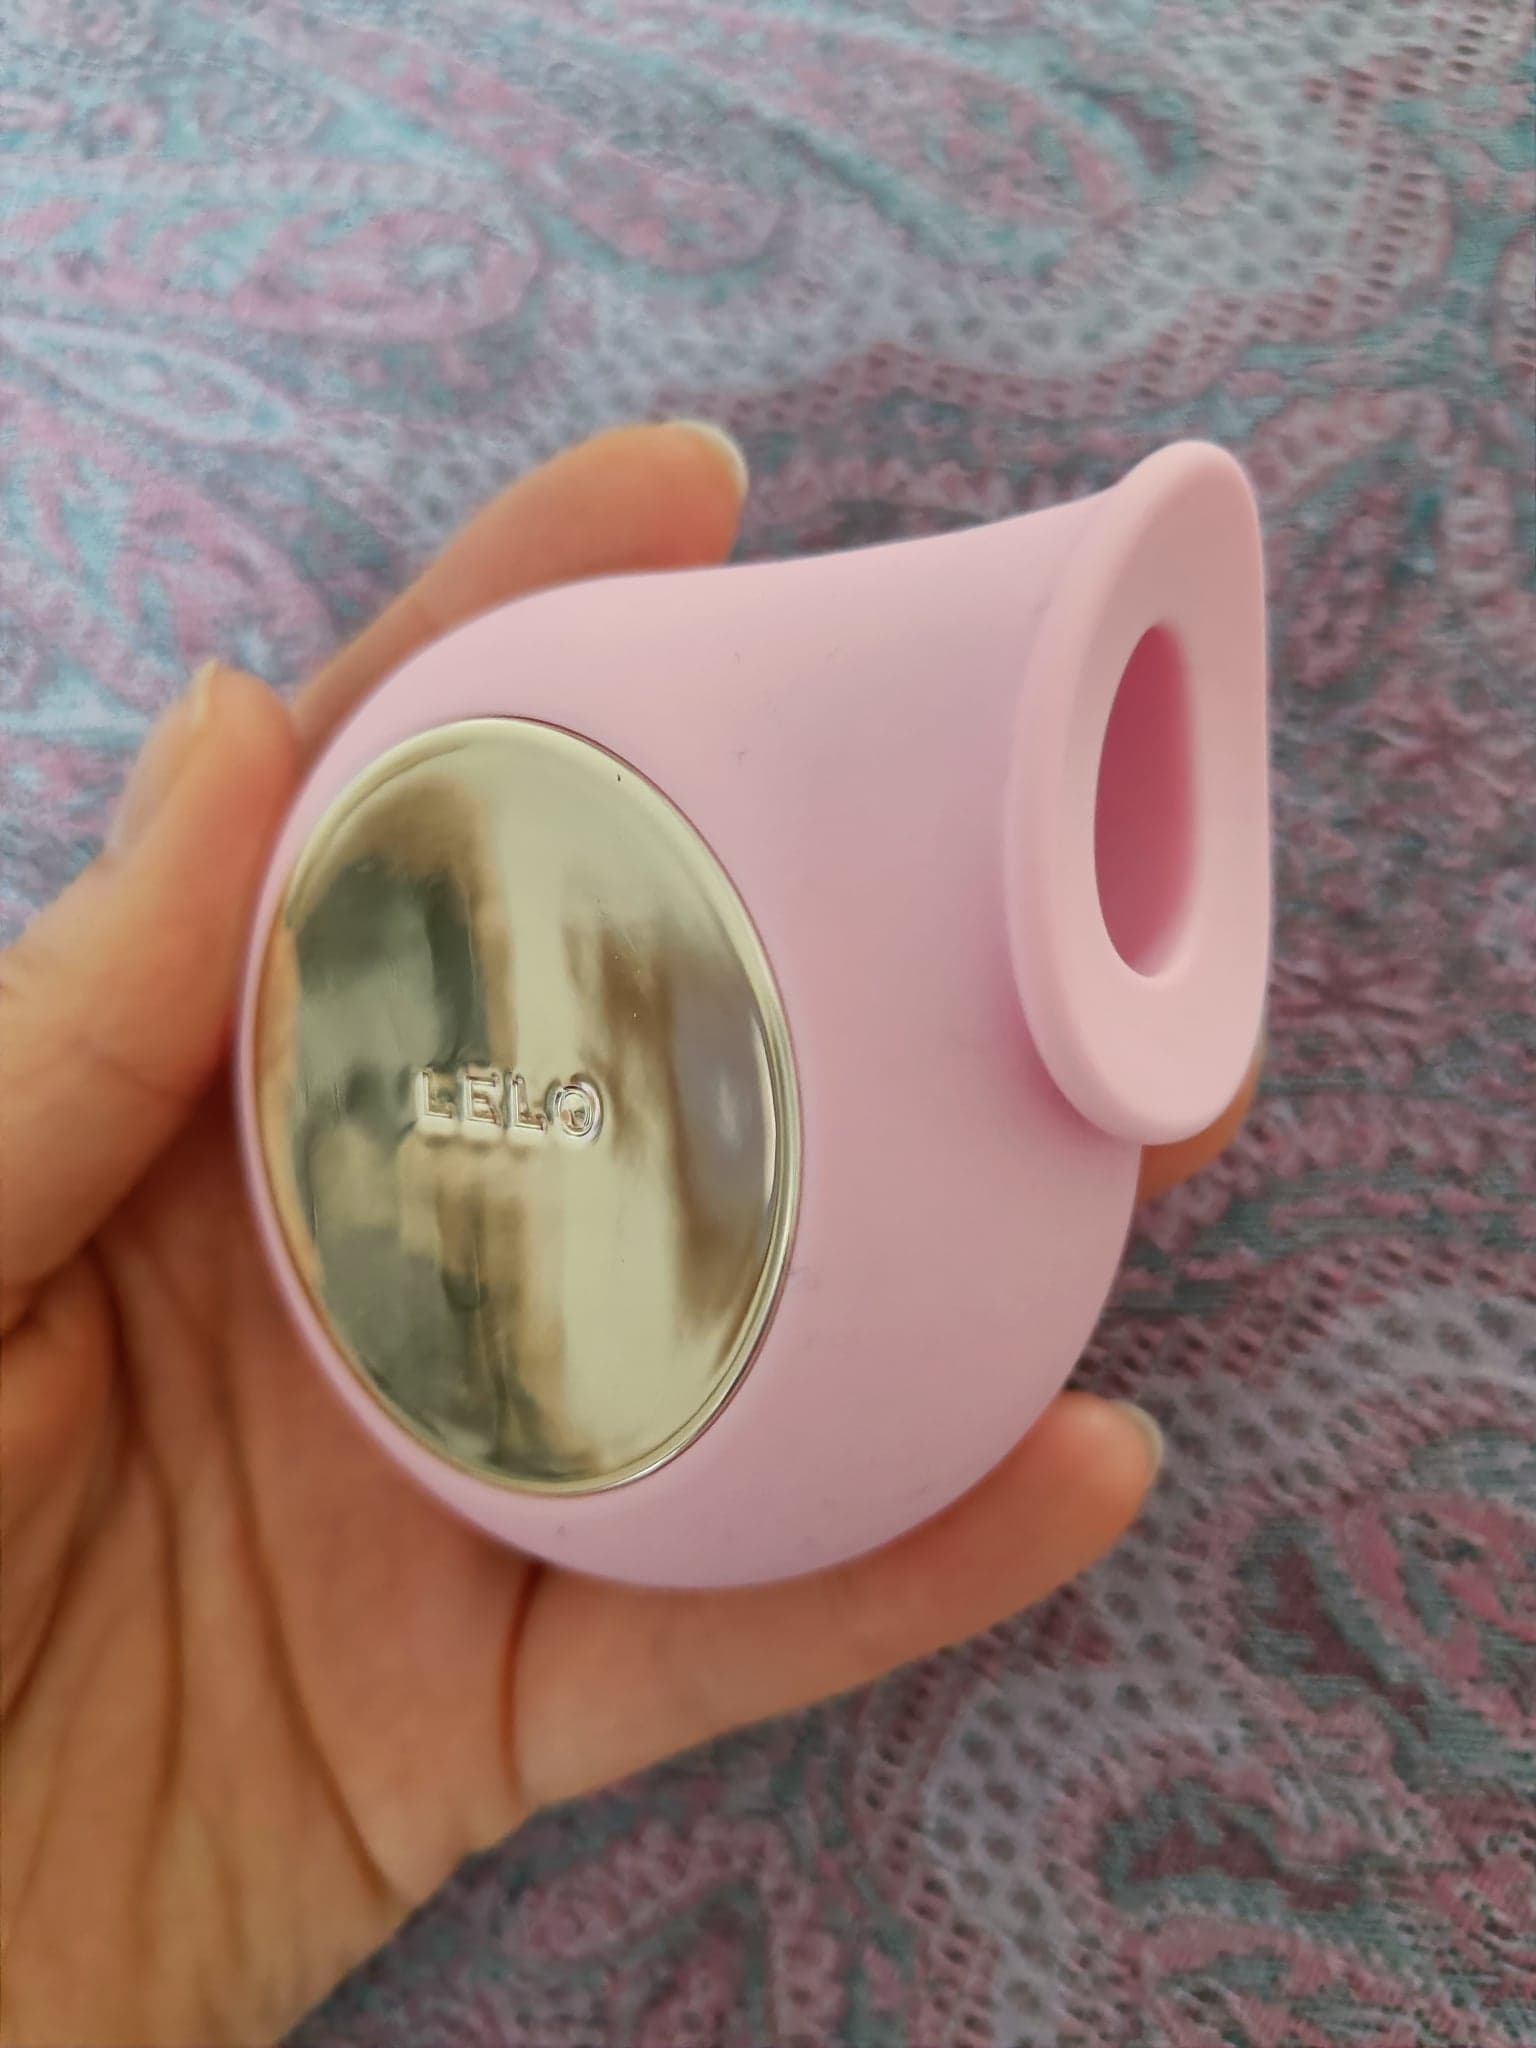 Lelo Sila Review of the Quality